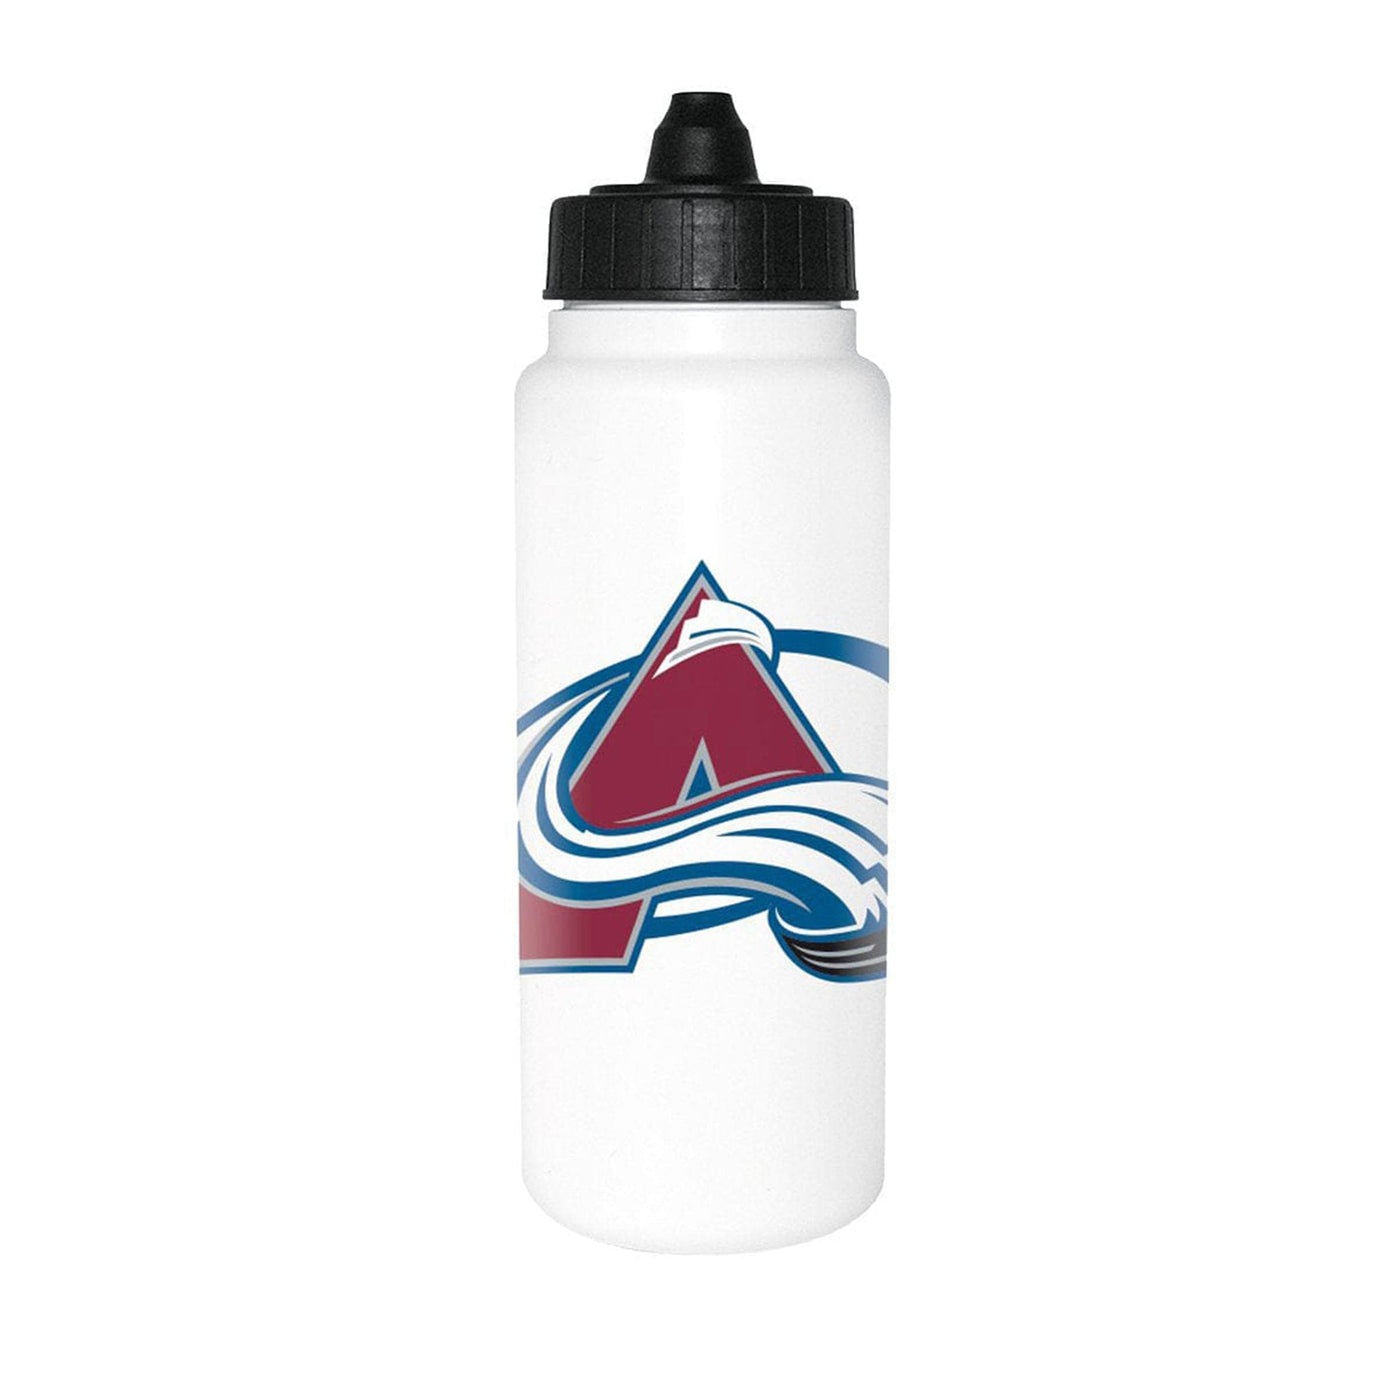 Colorado Avalanche Colored hockey Leggings Adult, youth and kids sizes